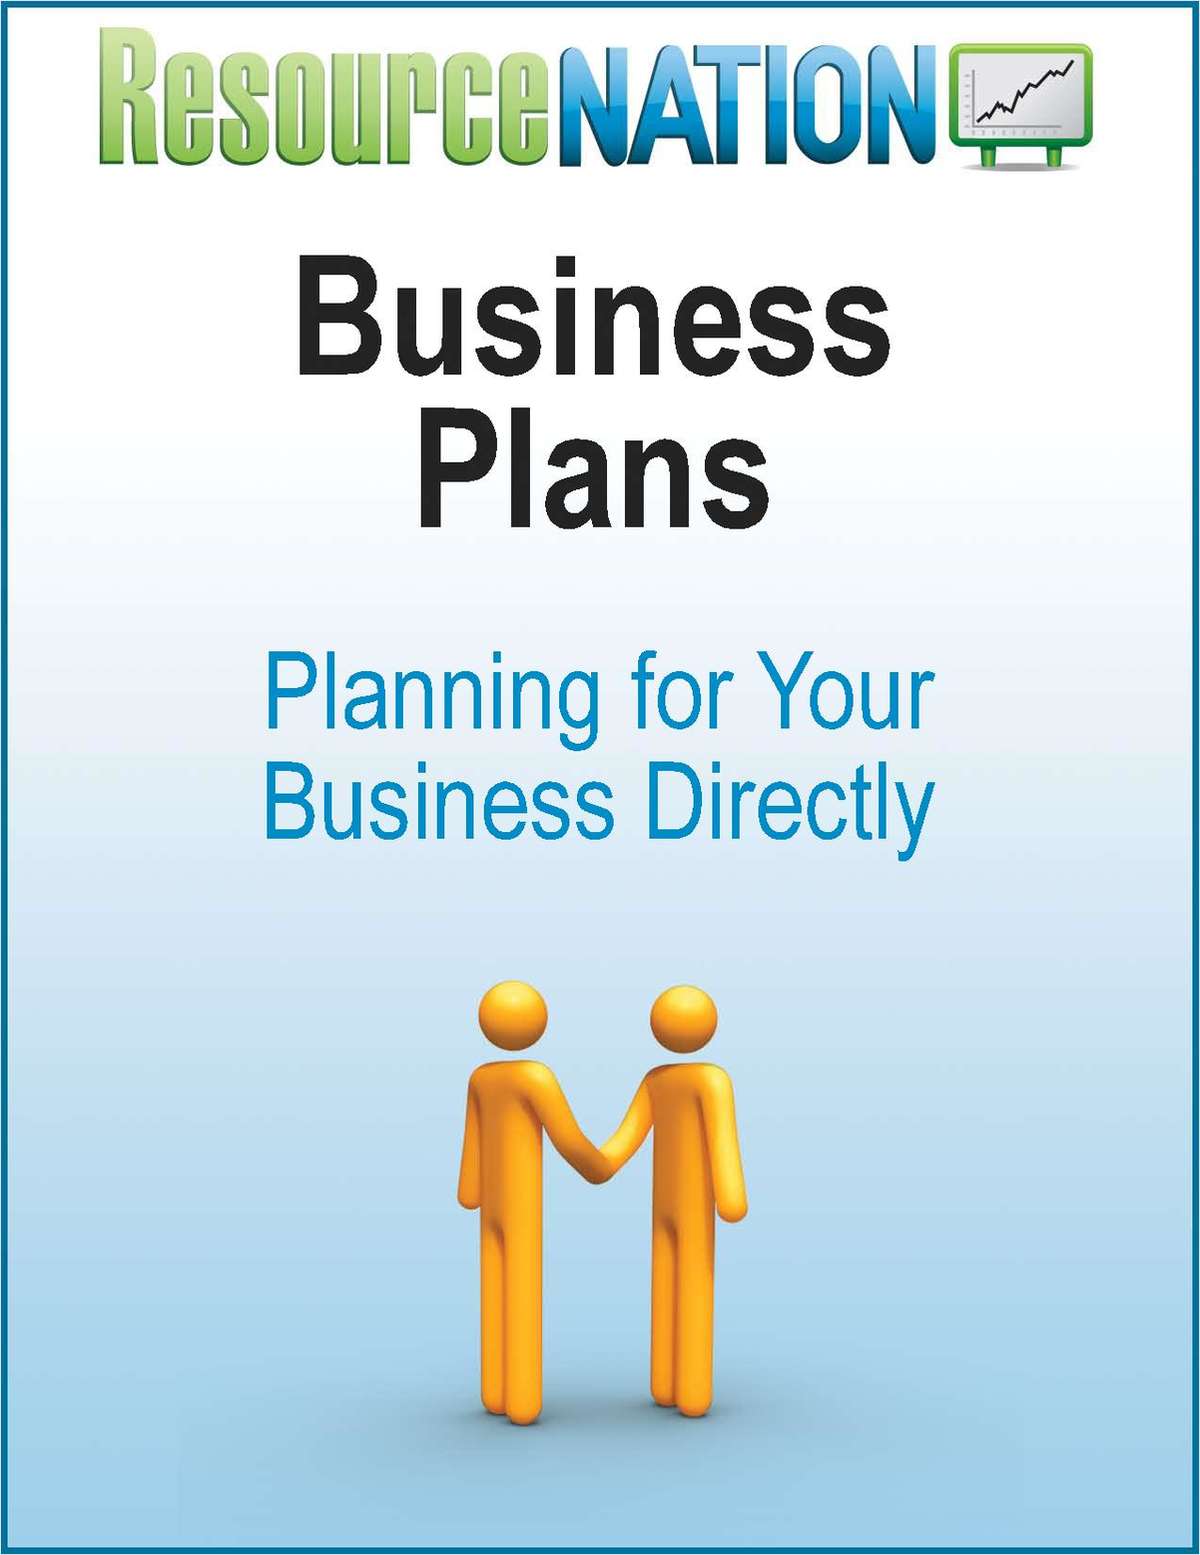 How to Choose a Business Plan Writer